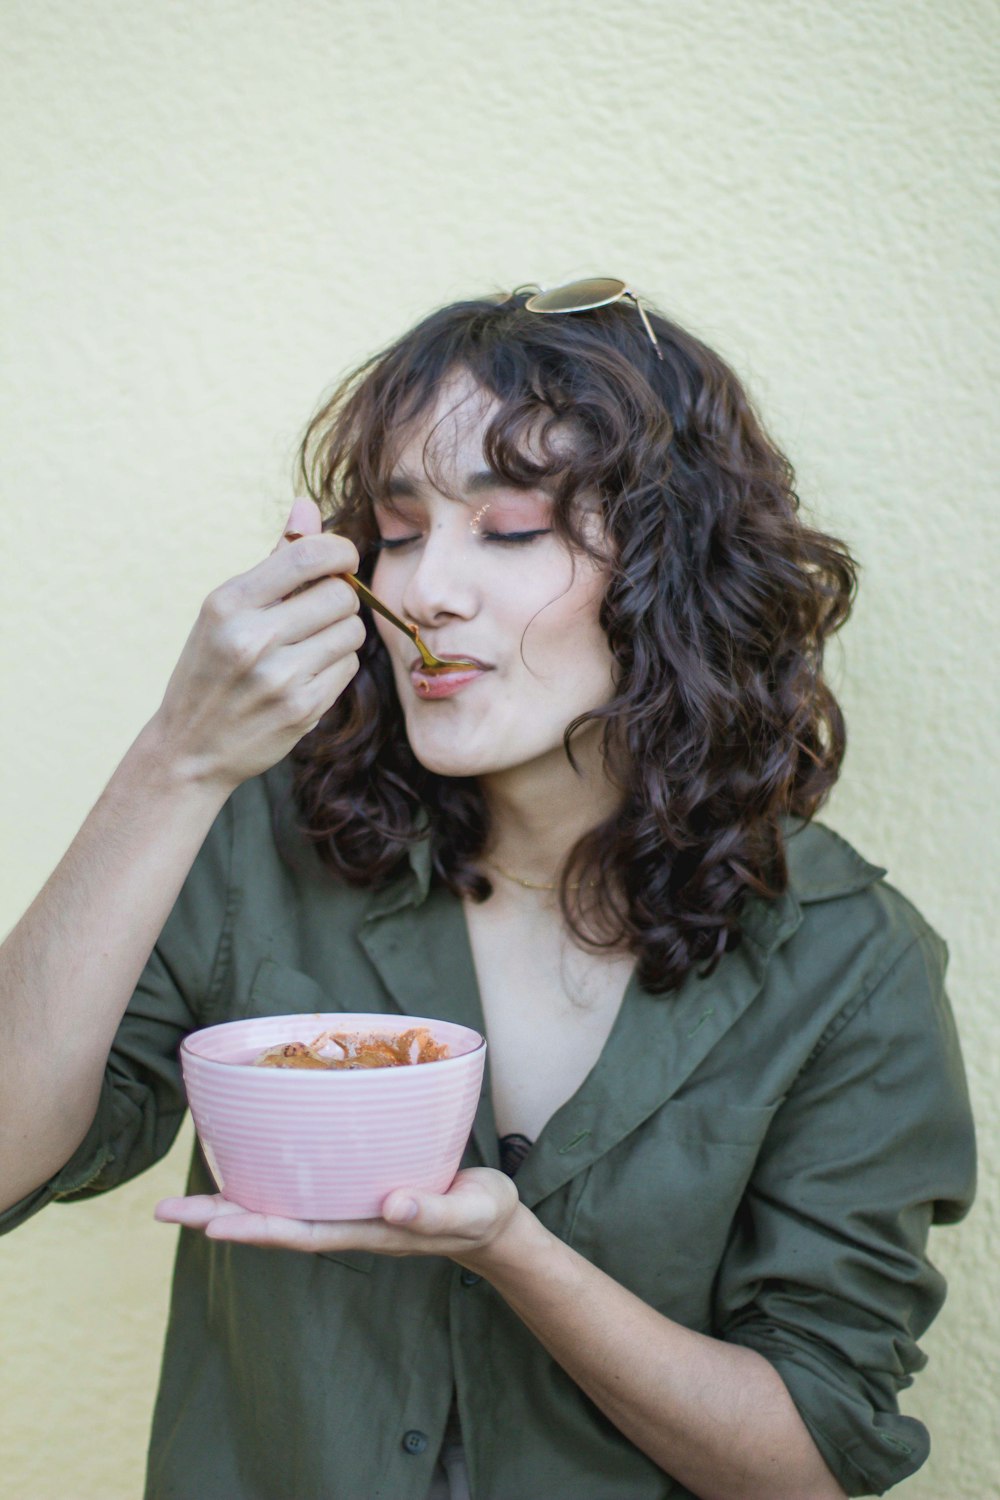 a woman holding a pink bowl of food